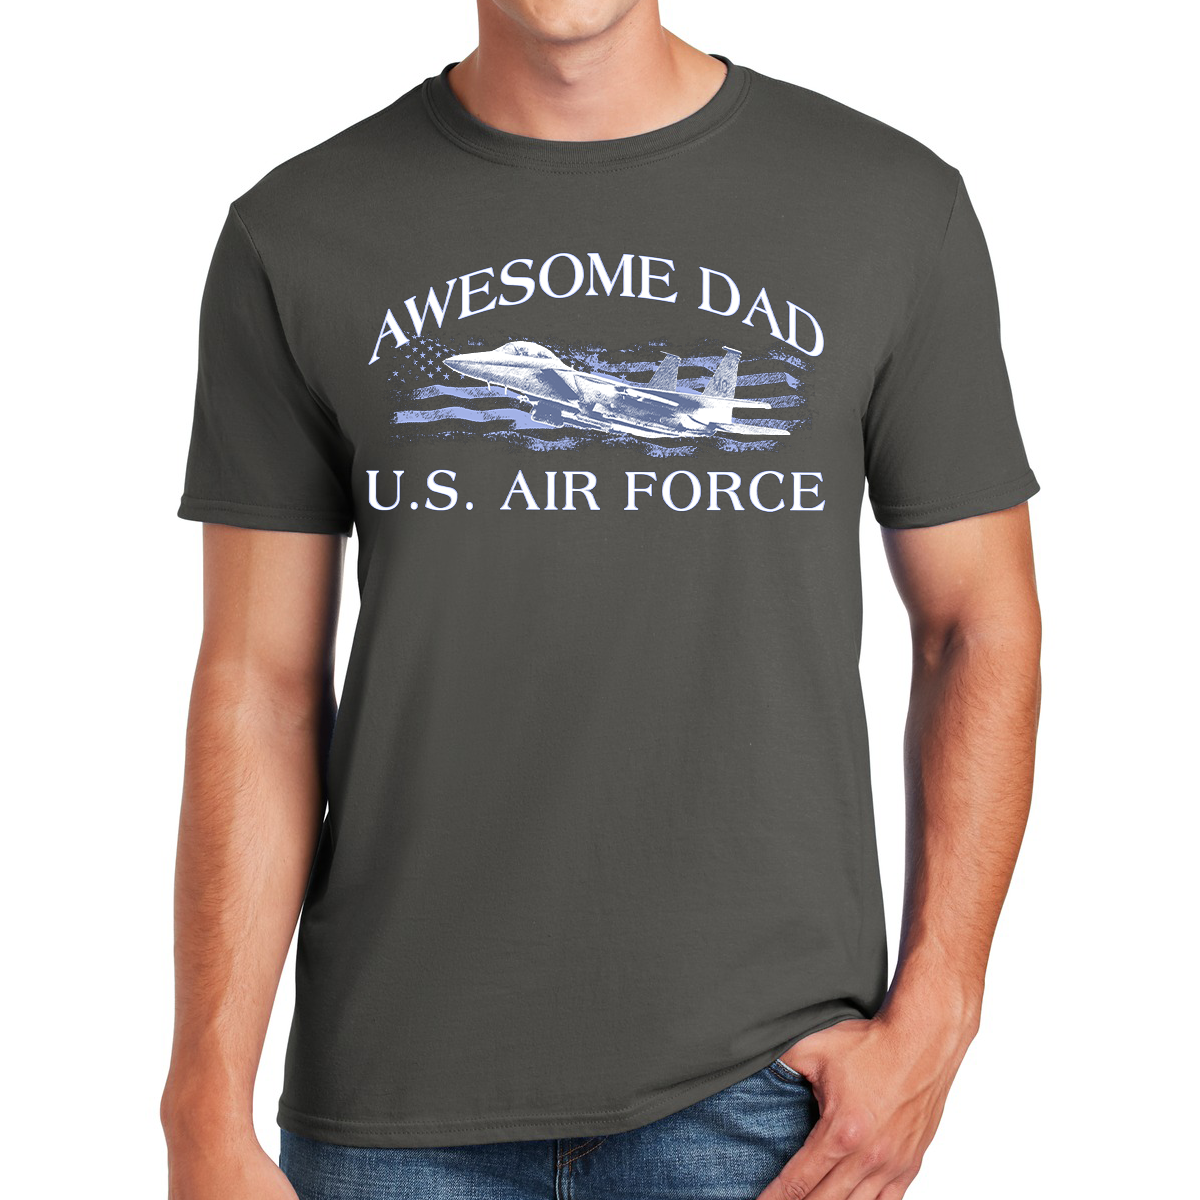 Awesome Dad Air Force Soaring To New Heights In Fatherhood Gift For Dads T-shirt